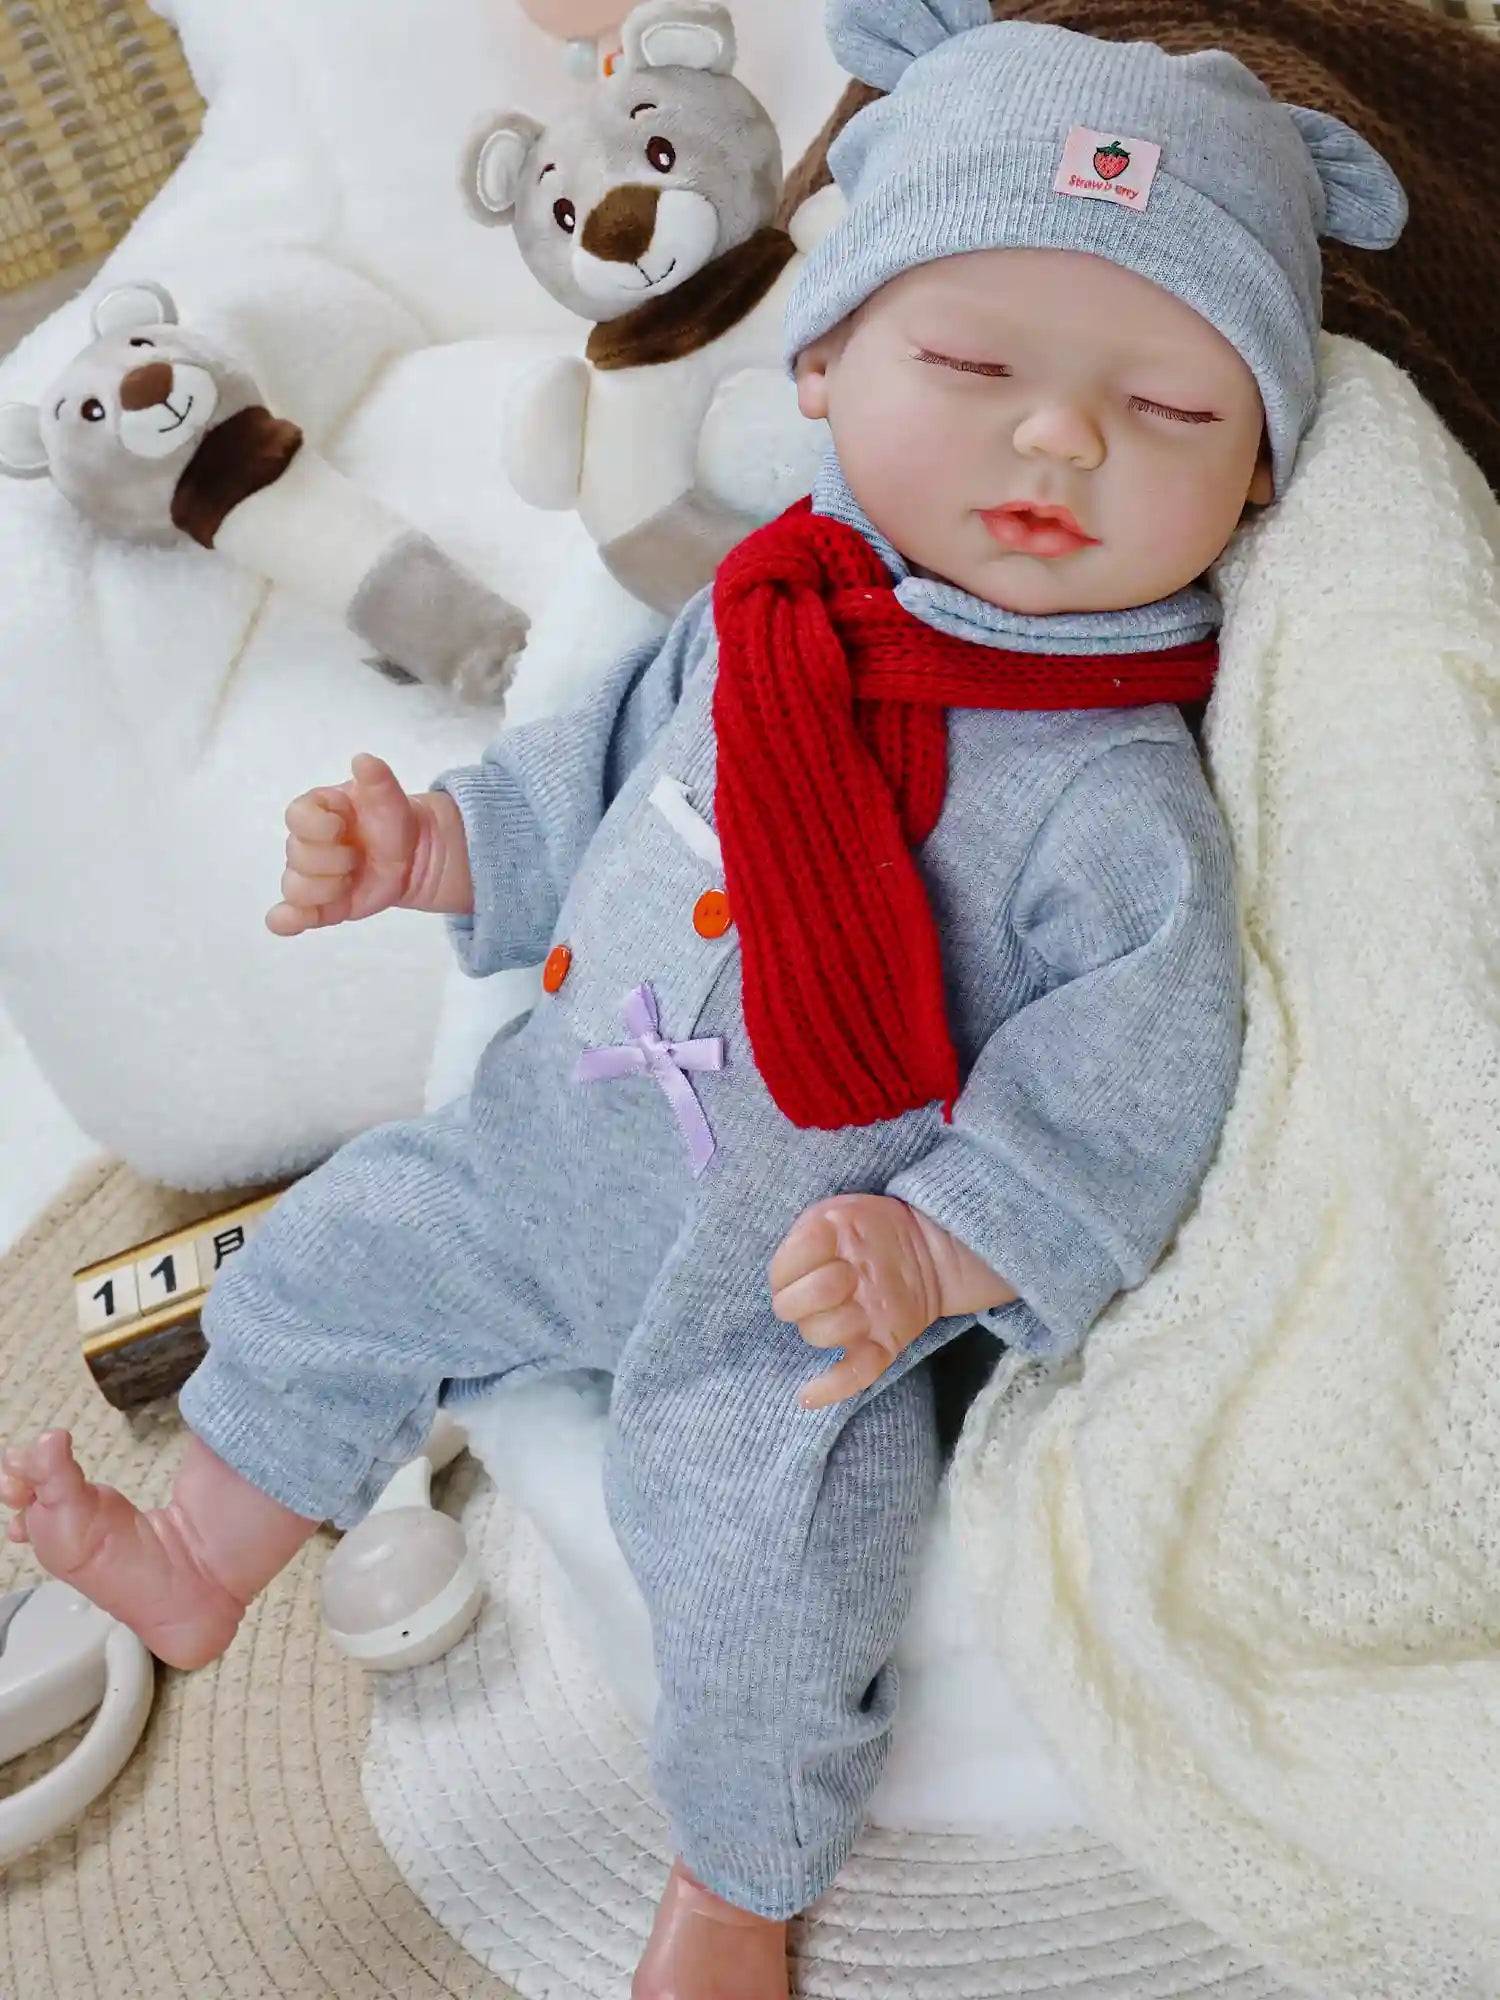 A baby doll dressed in a grey outfit with a matching hat and a red scarf, lying on a soft blanket. The doll's eyes are closed, and it is surrounded by plush bear toys, creating a cozy and peaceful scene.